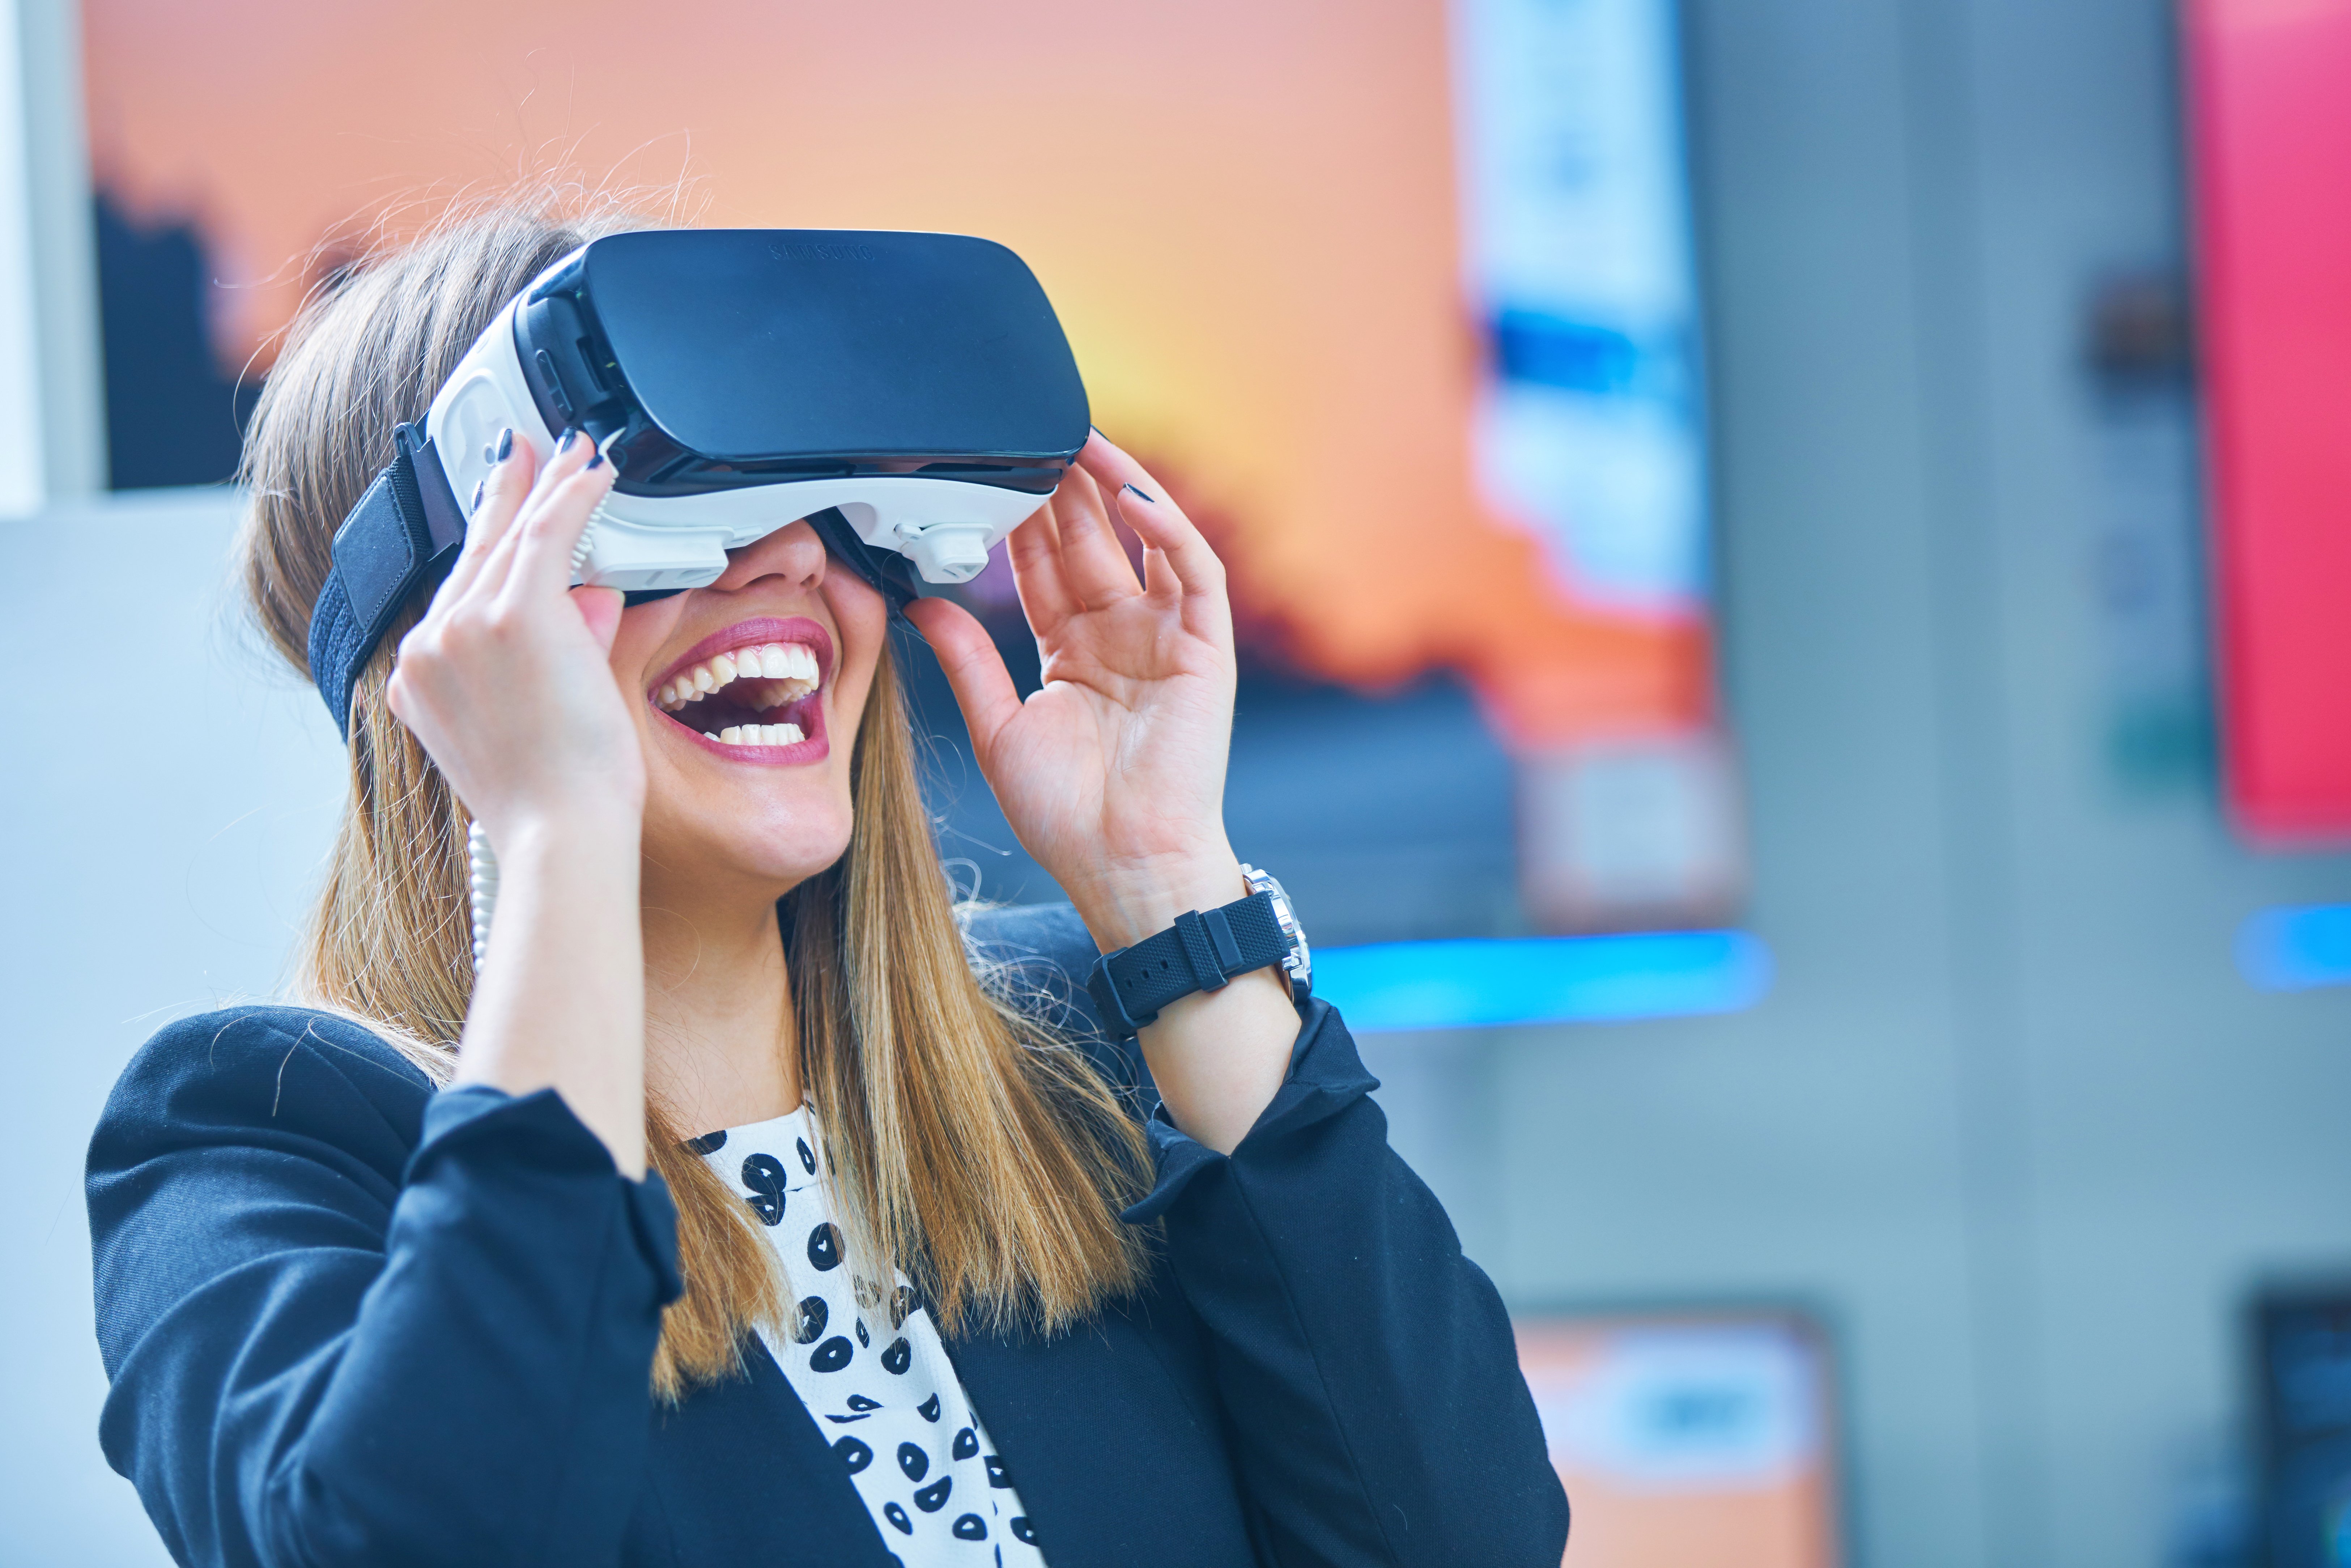 A young woman using a virtual reality headset